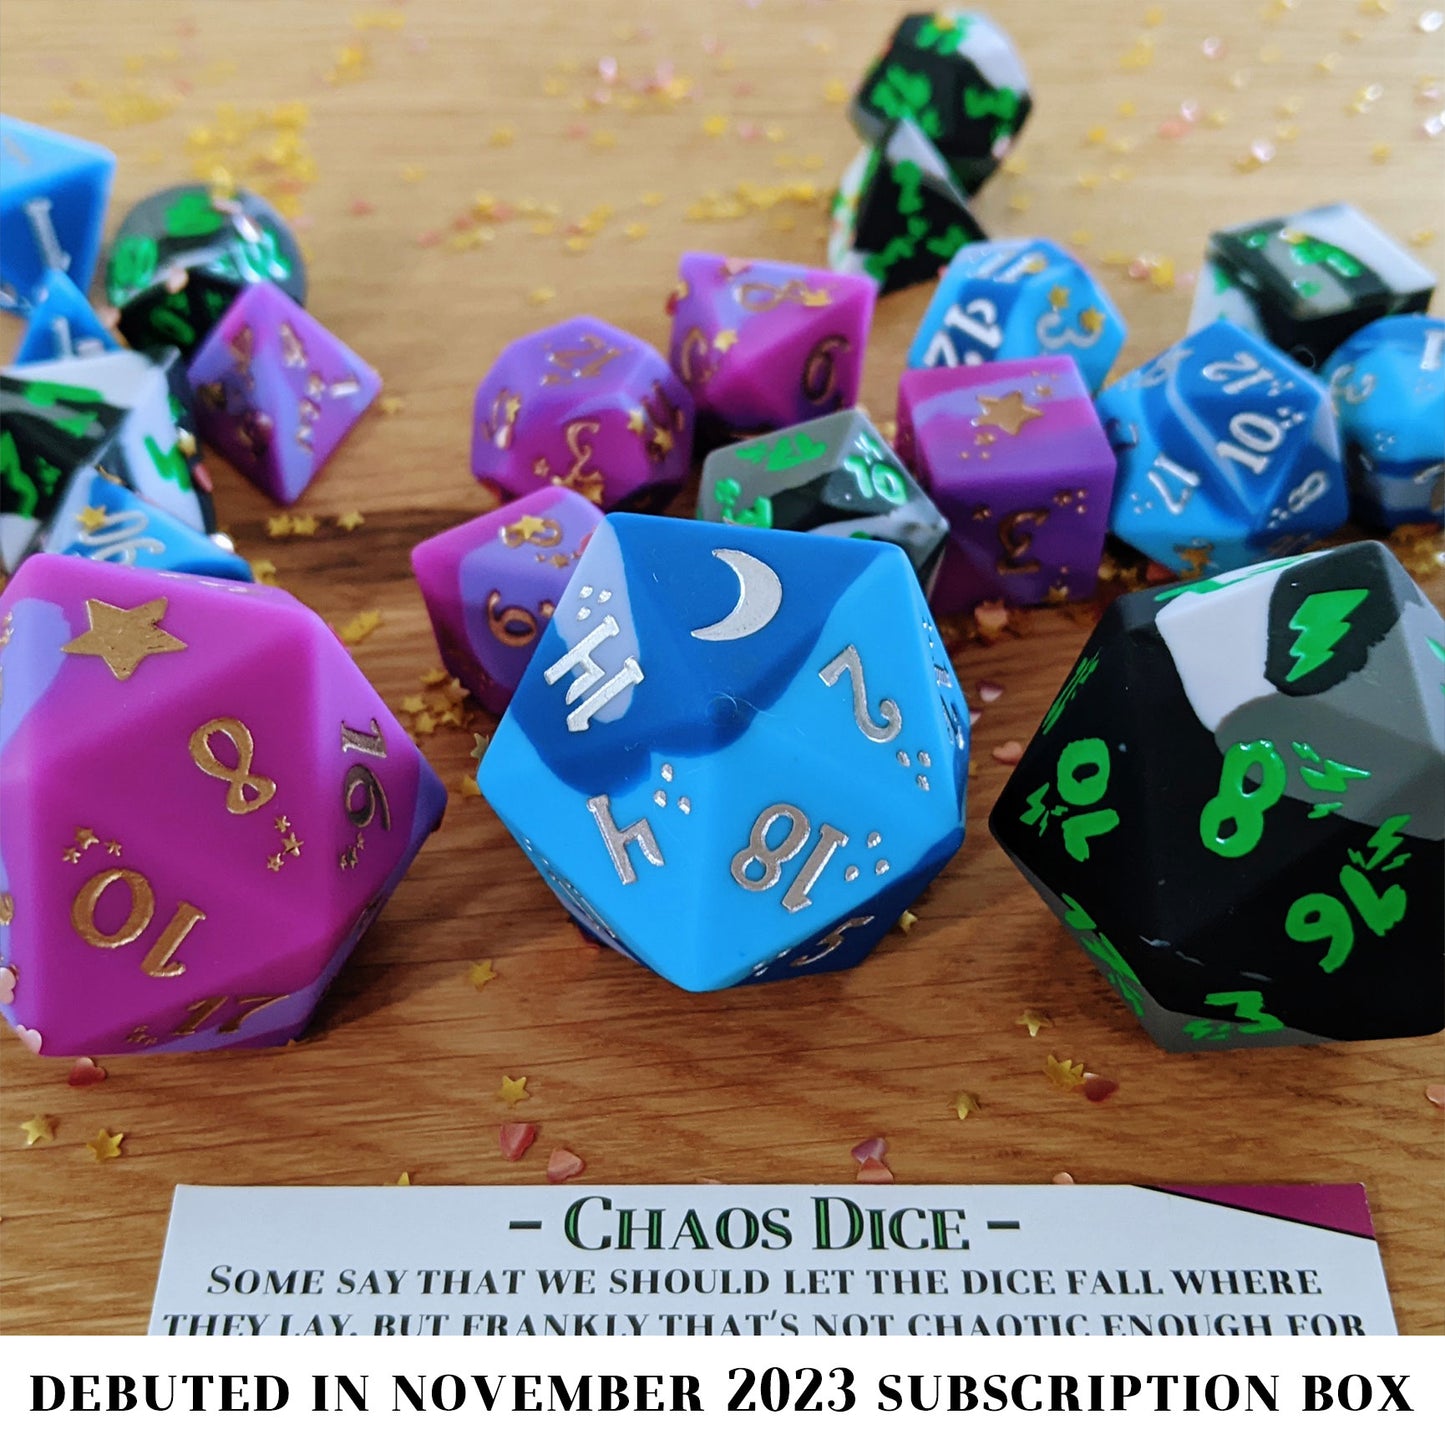 Chaotic Evil is an 8-piece, swirled silicone dice set in stark black, white, and grey. It features an electrifying, neon green ink design.